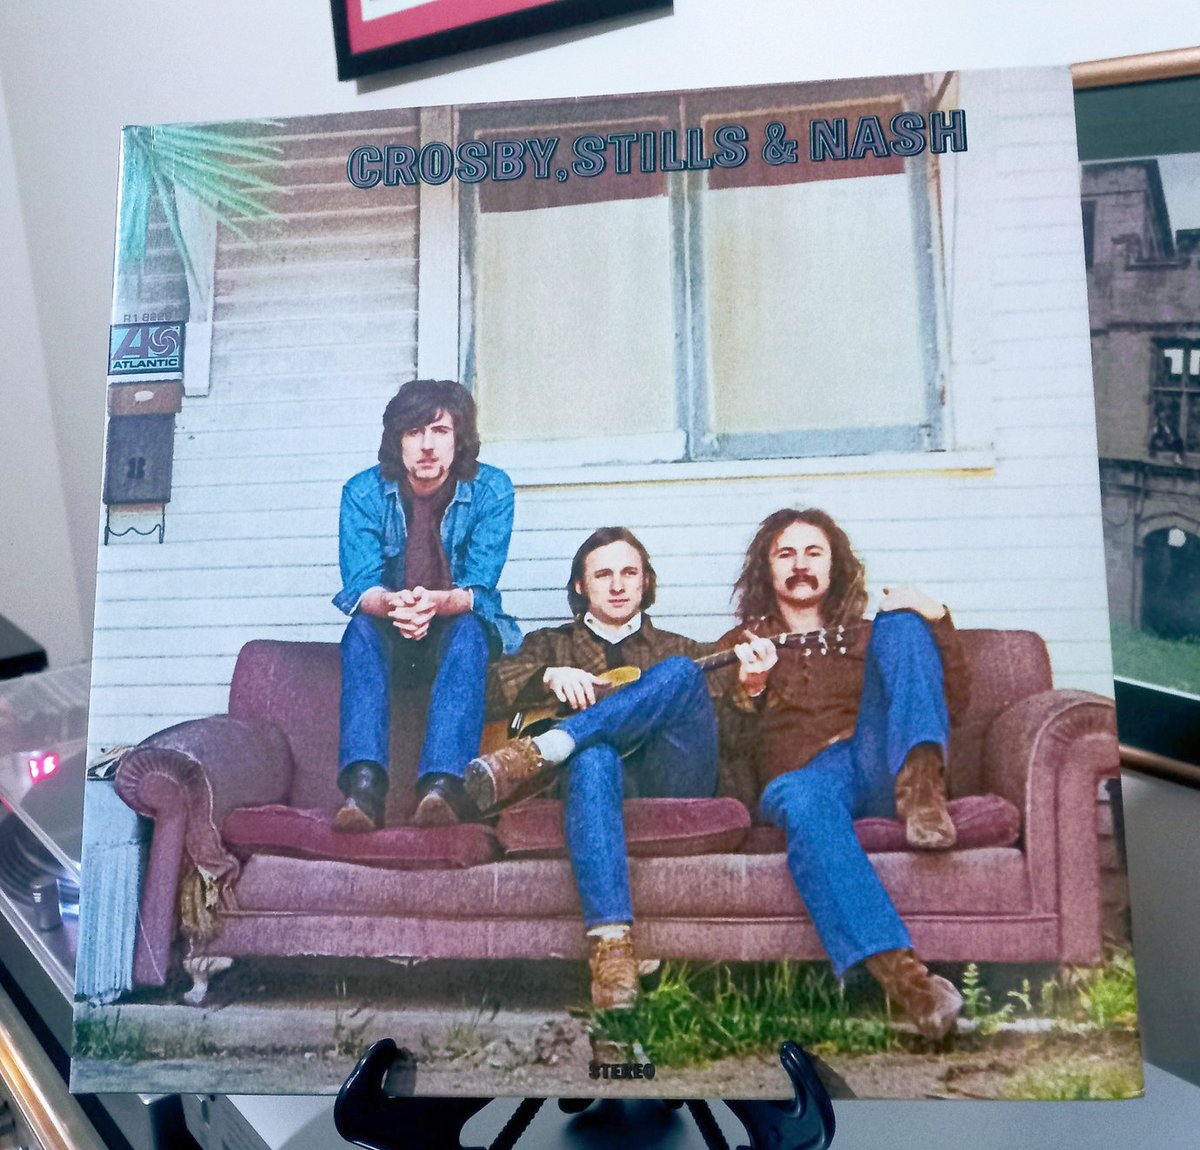 Debut album by Crosby, Stills and Nash, 1969 

Very mature songs with a unique texture, which marked the group. Highlight for Guinevere. 

#CrosbyStillsandNash #woodstock